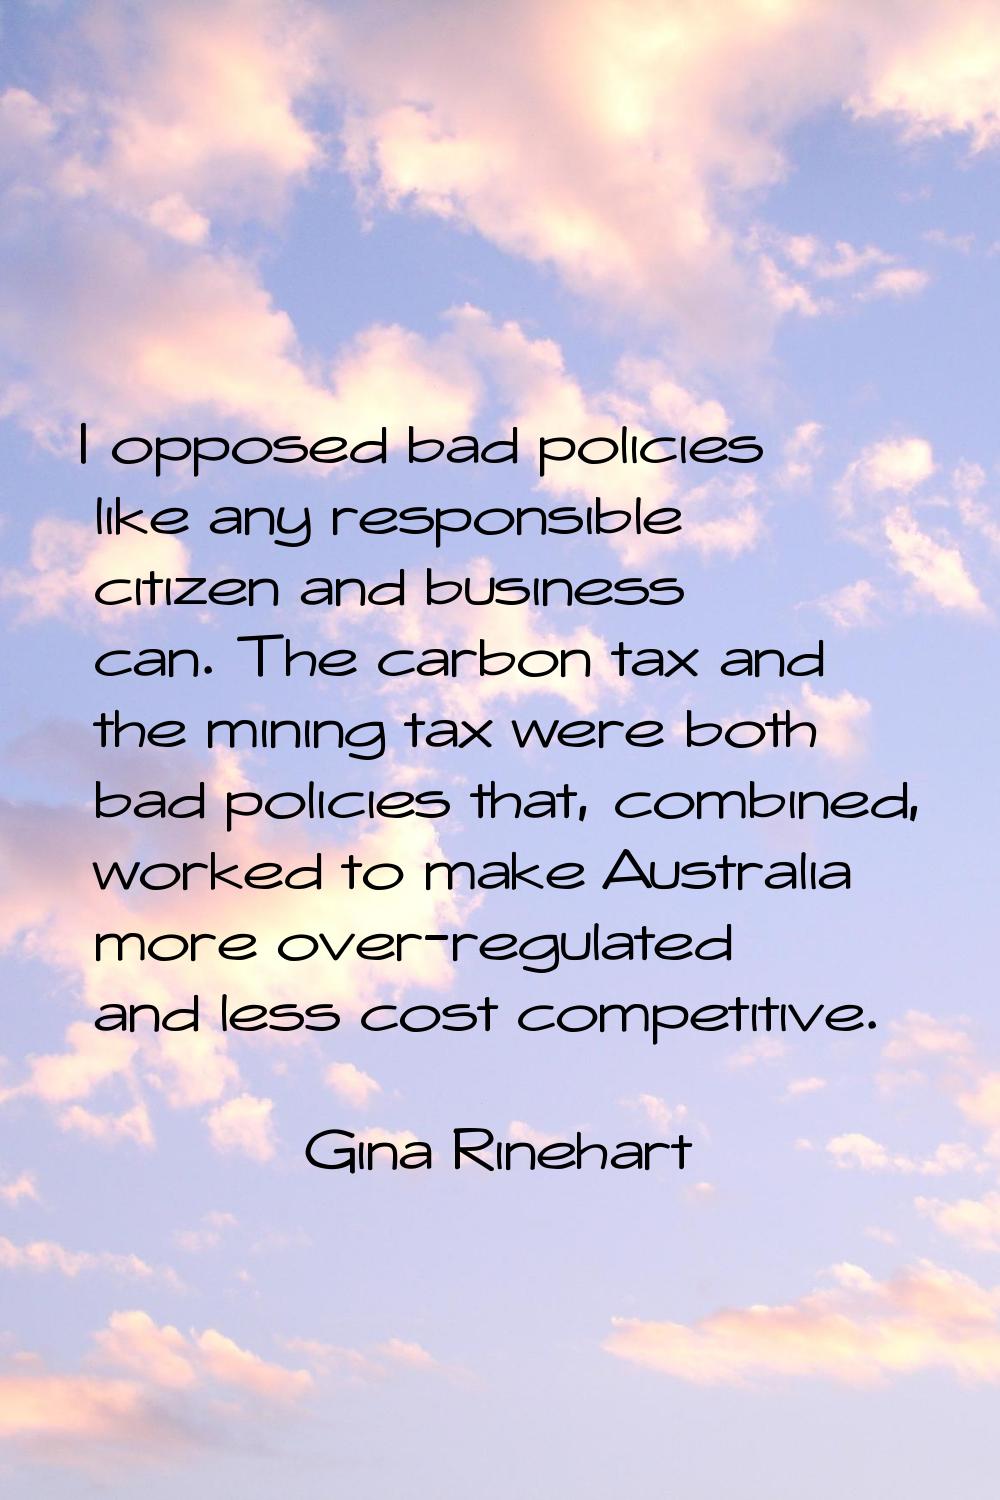 I opposed bad policies like any responsible citizen and business can. The carbon tax and the mining